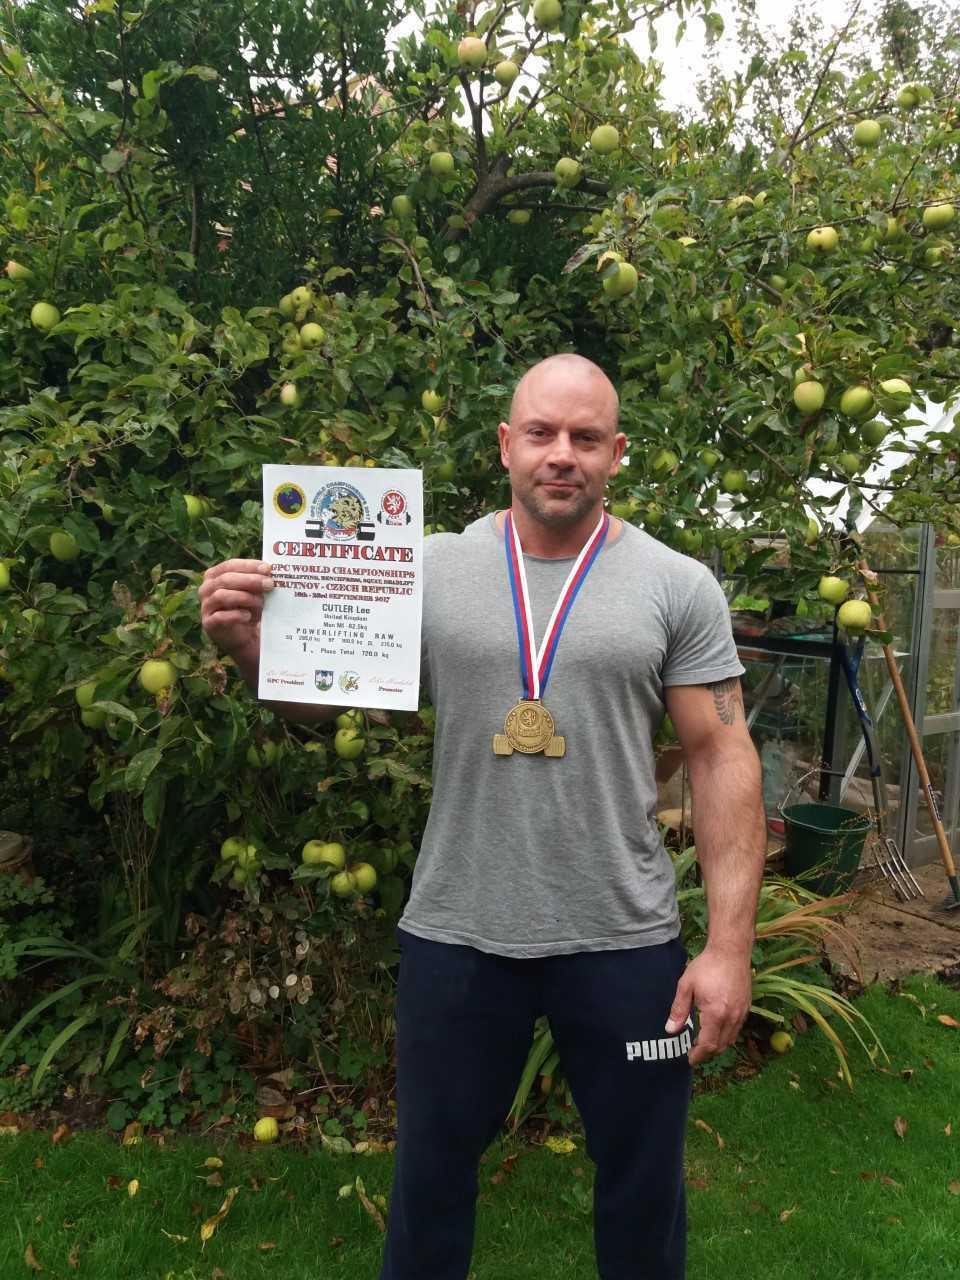 Gold fever on the world stage for Bournemouth powerlifter | Bournemouth Echo